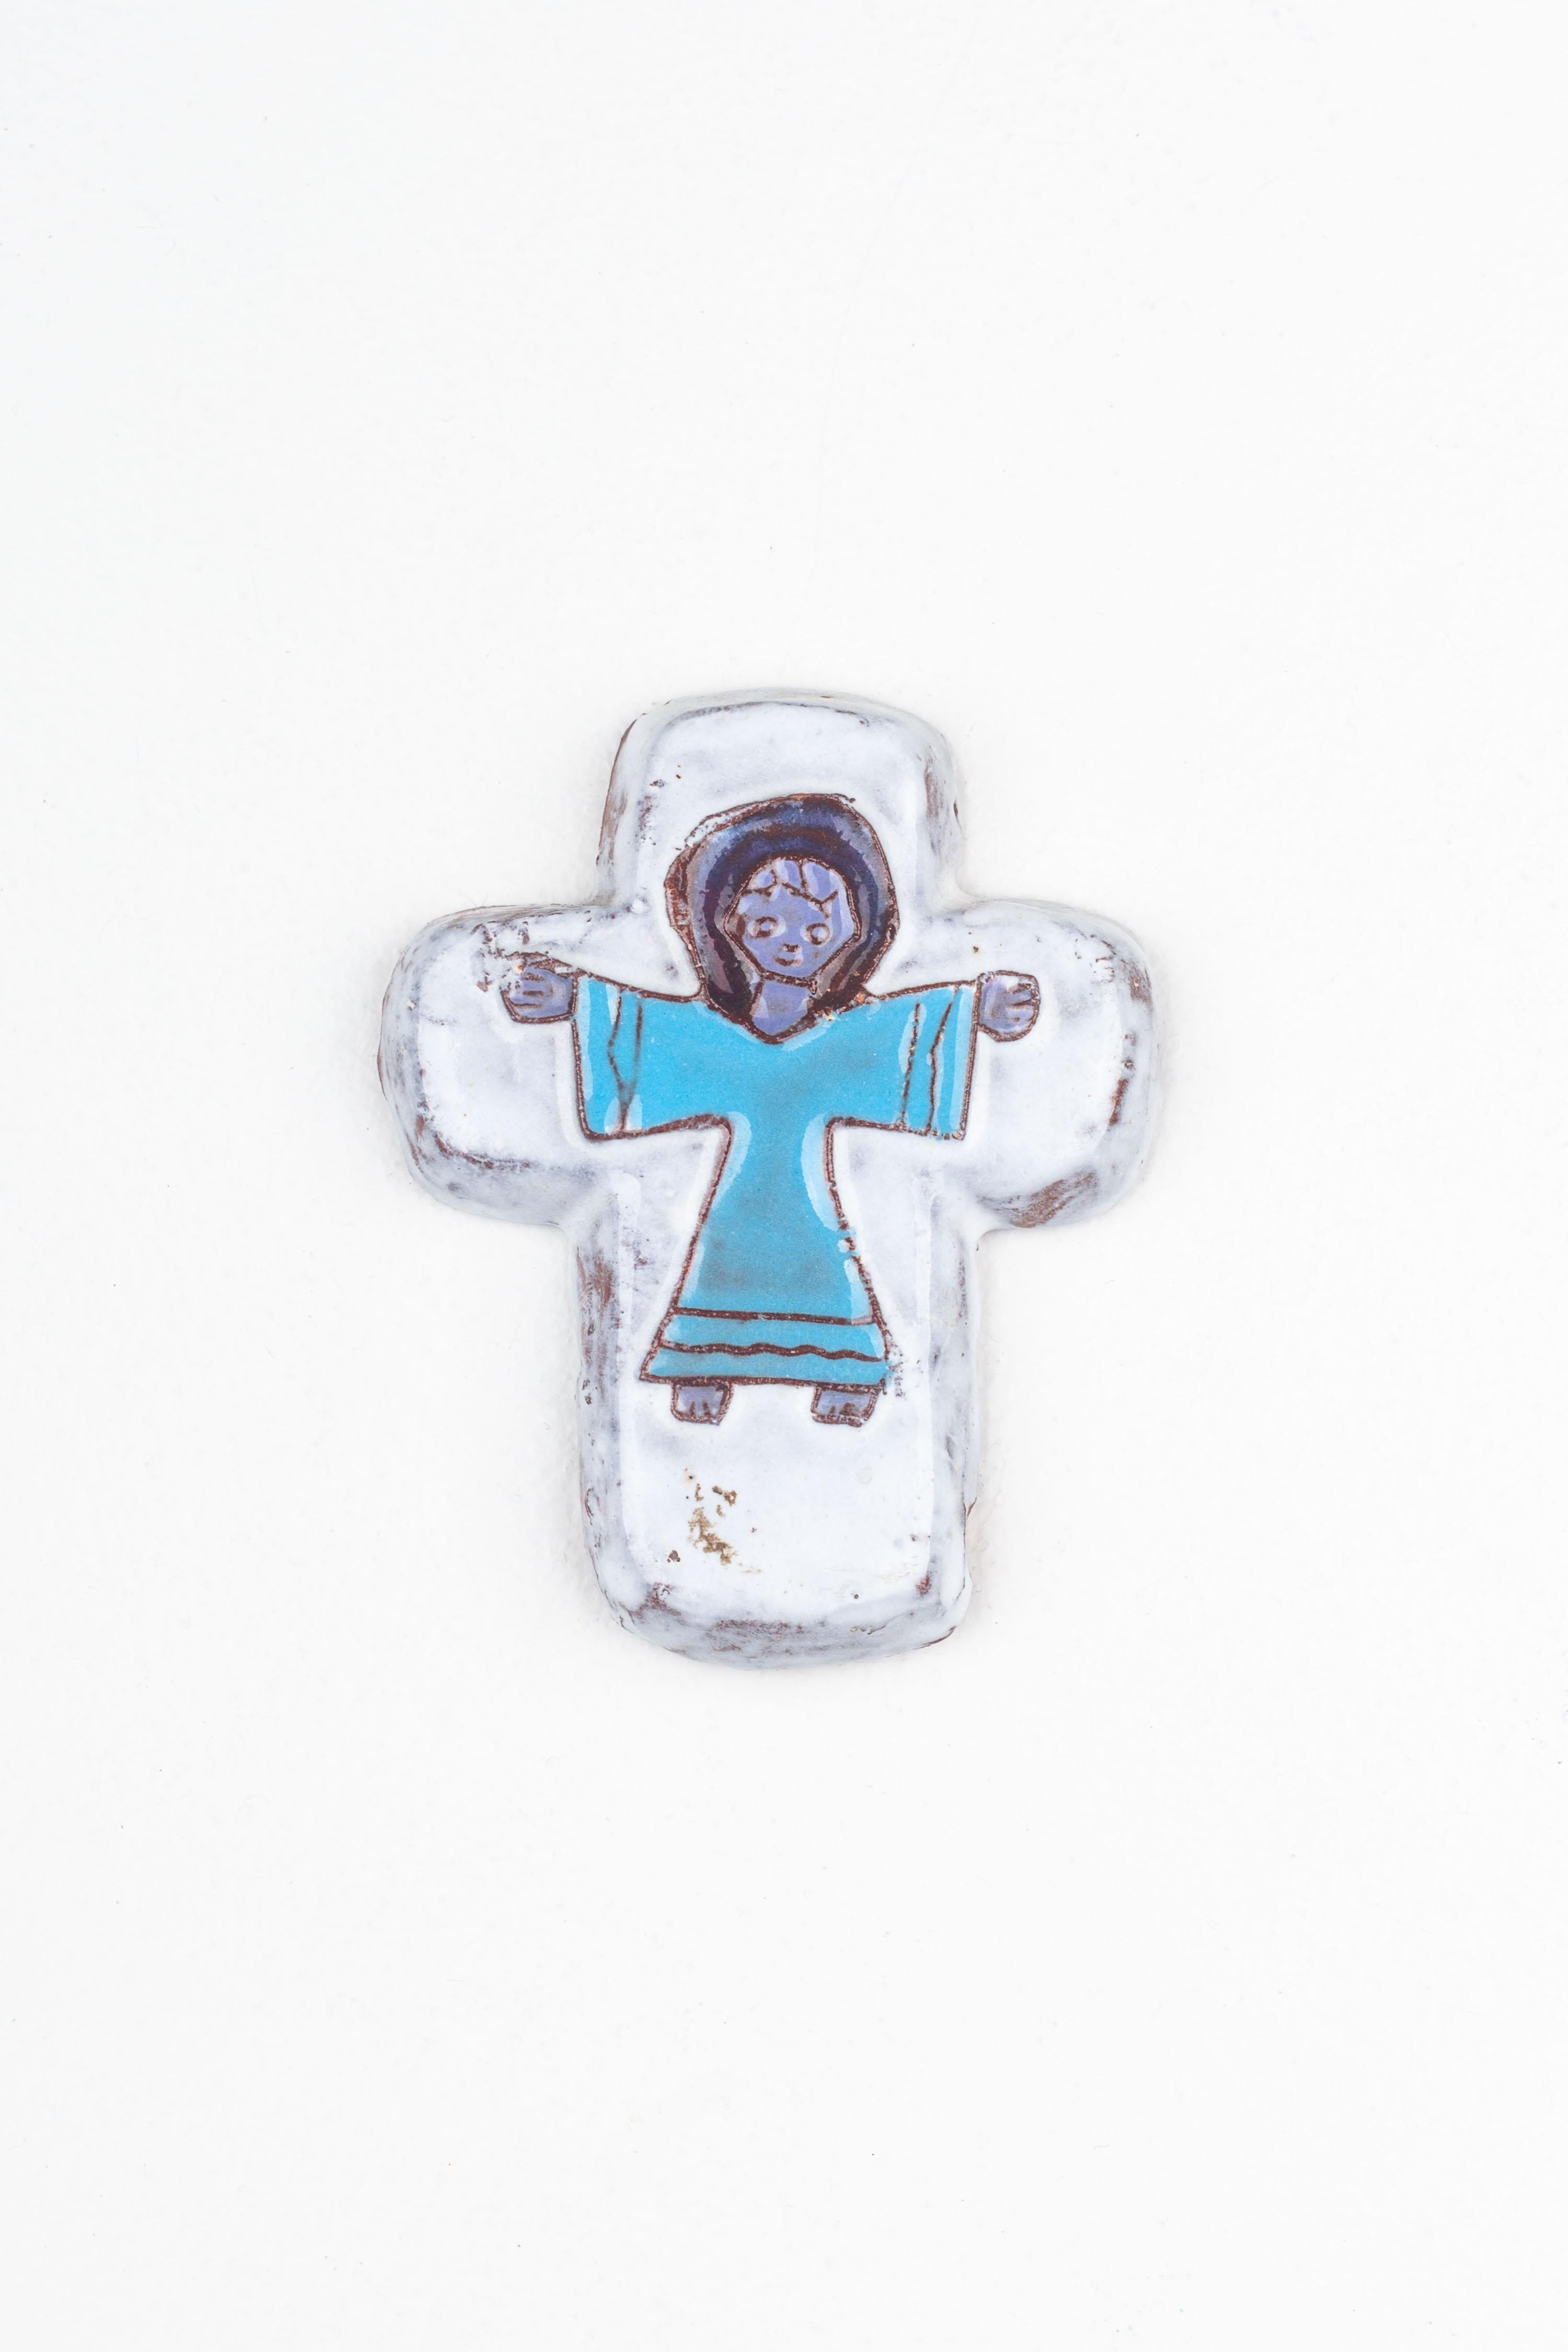 This handcrafted ceramic cross is a vibrant exemplar of mid-century modern design, infused with the characteristic playfulness and colorfulness of the era. European studio pottery artists, celebrated for their innovative and expressive approaches,